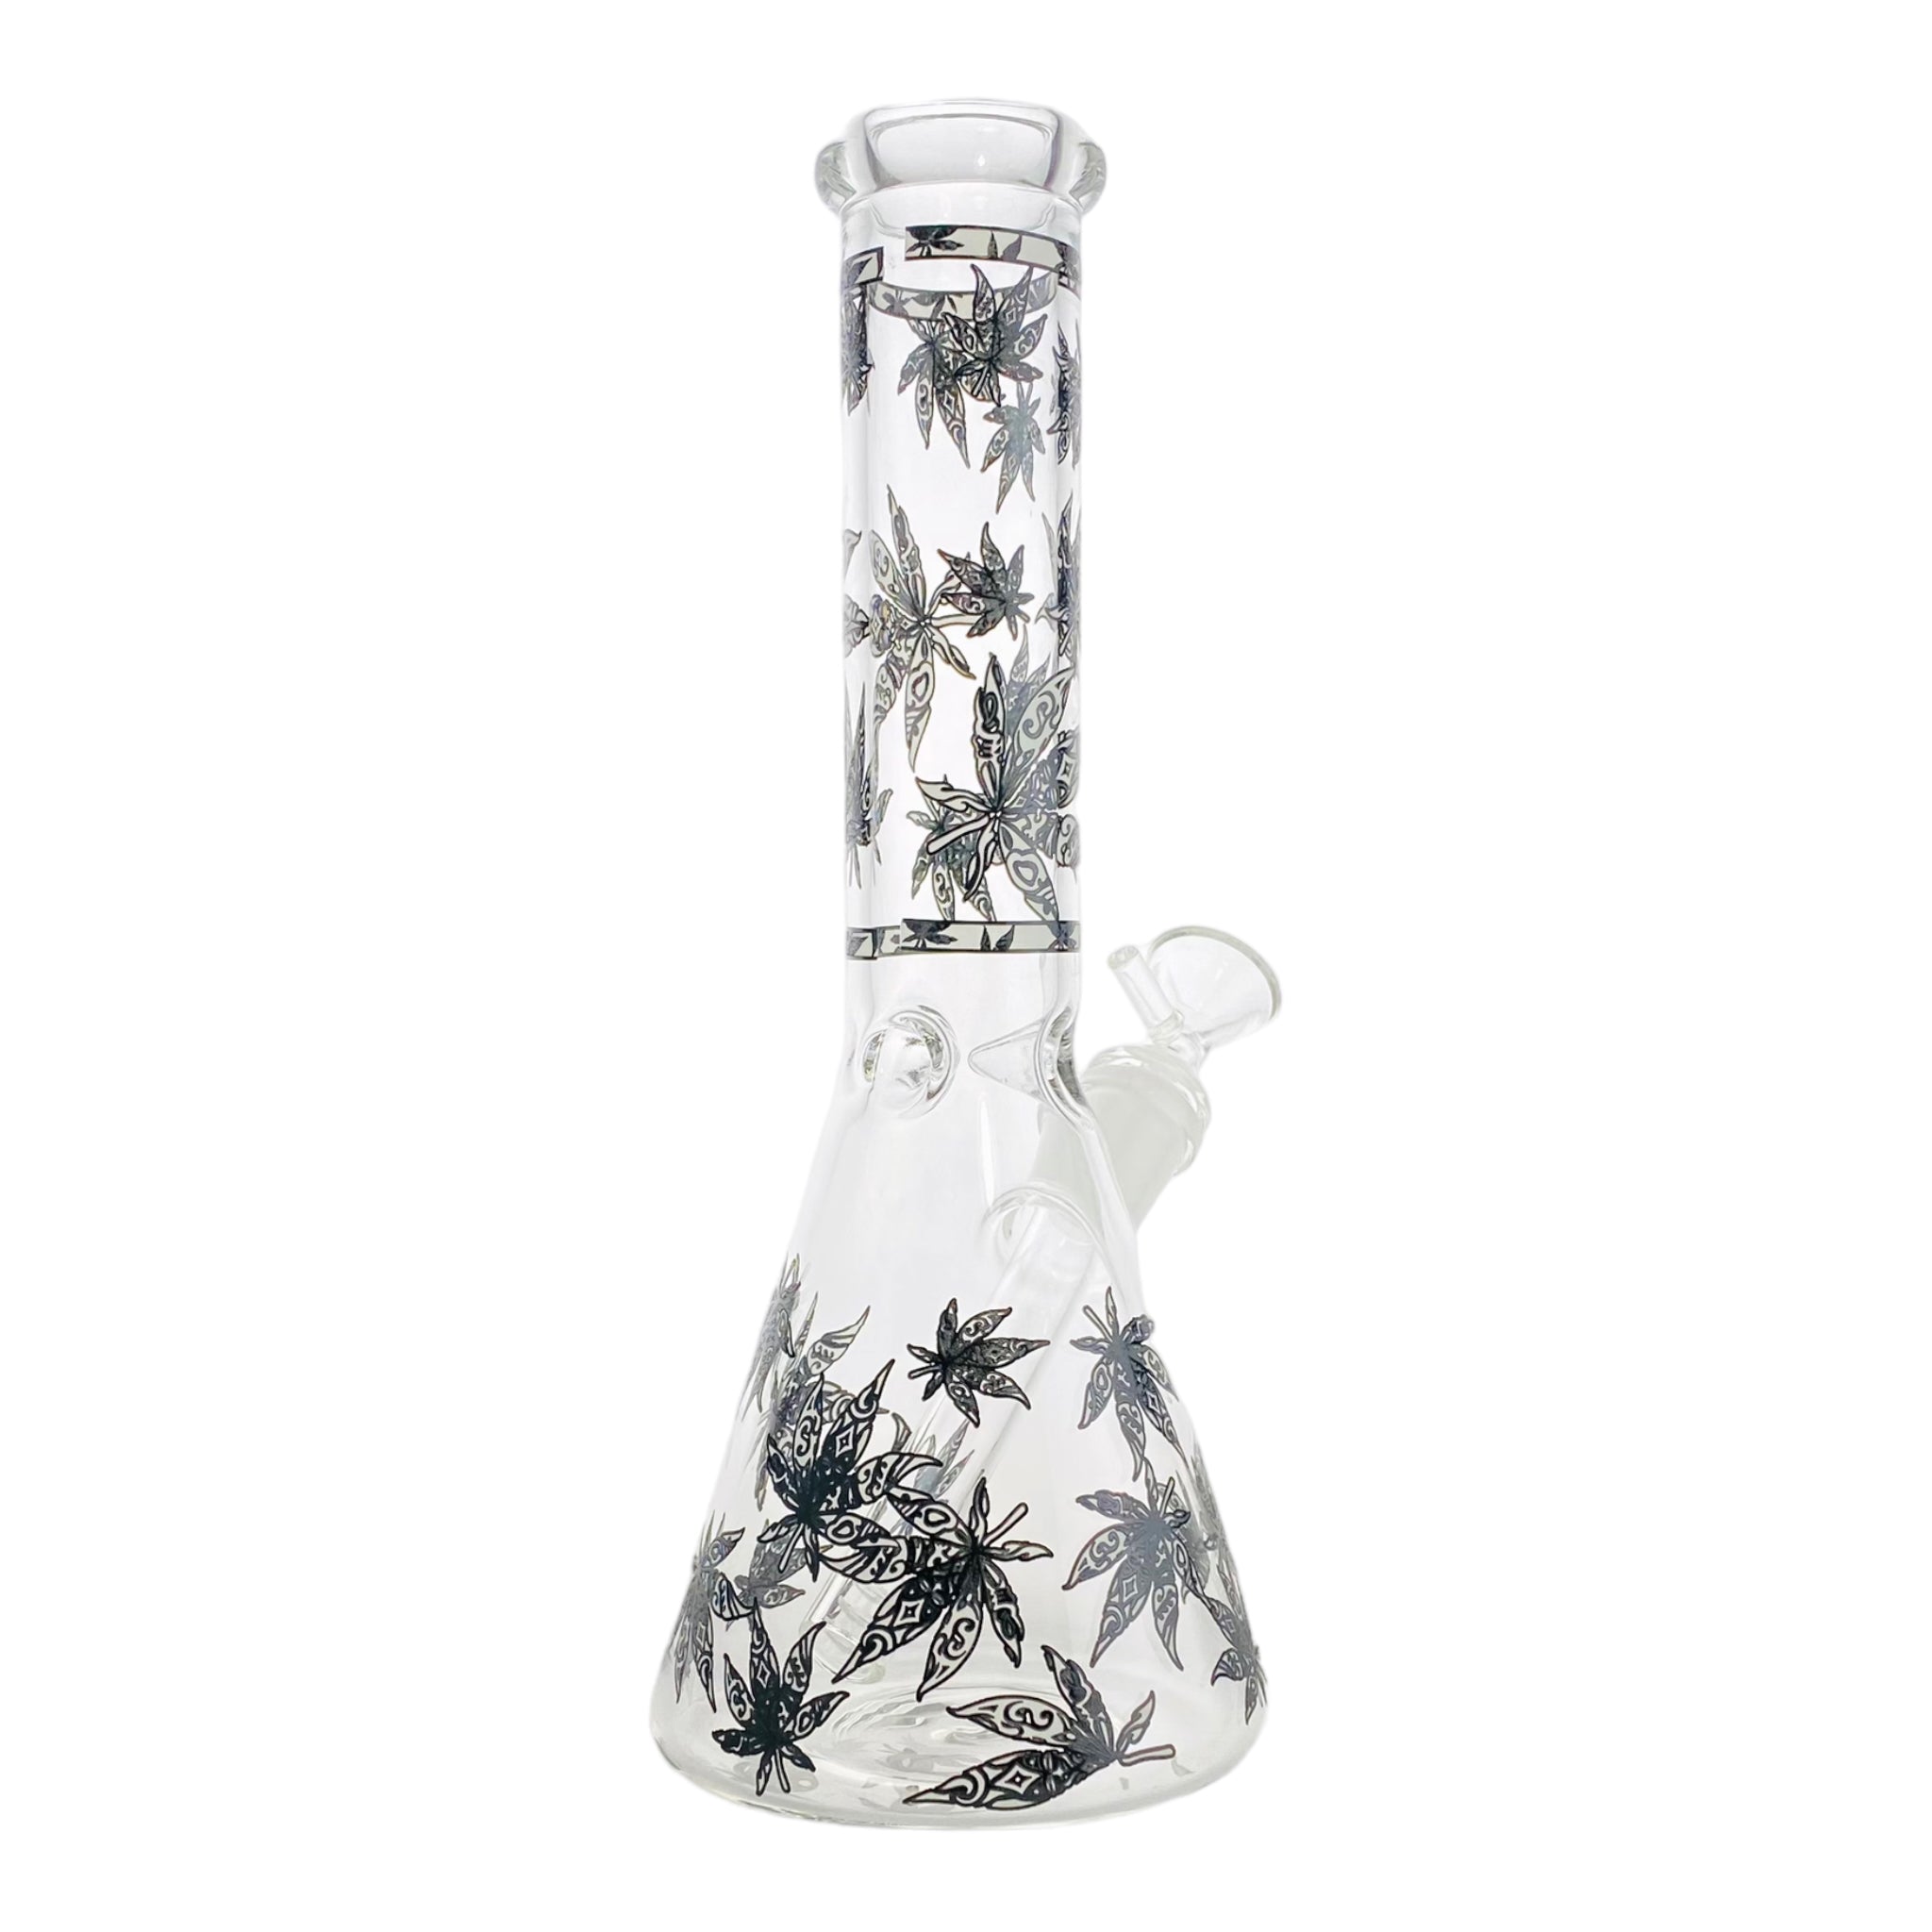 10 Inch Glass Beaker Bong with Decorative Weed Leaves